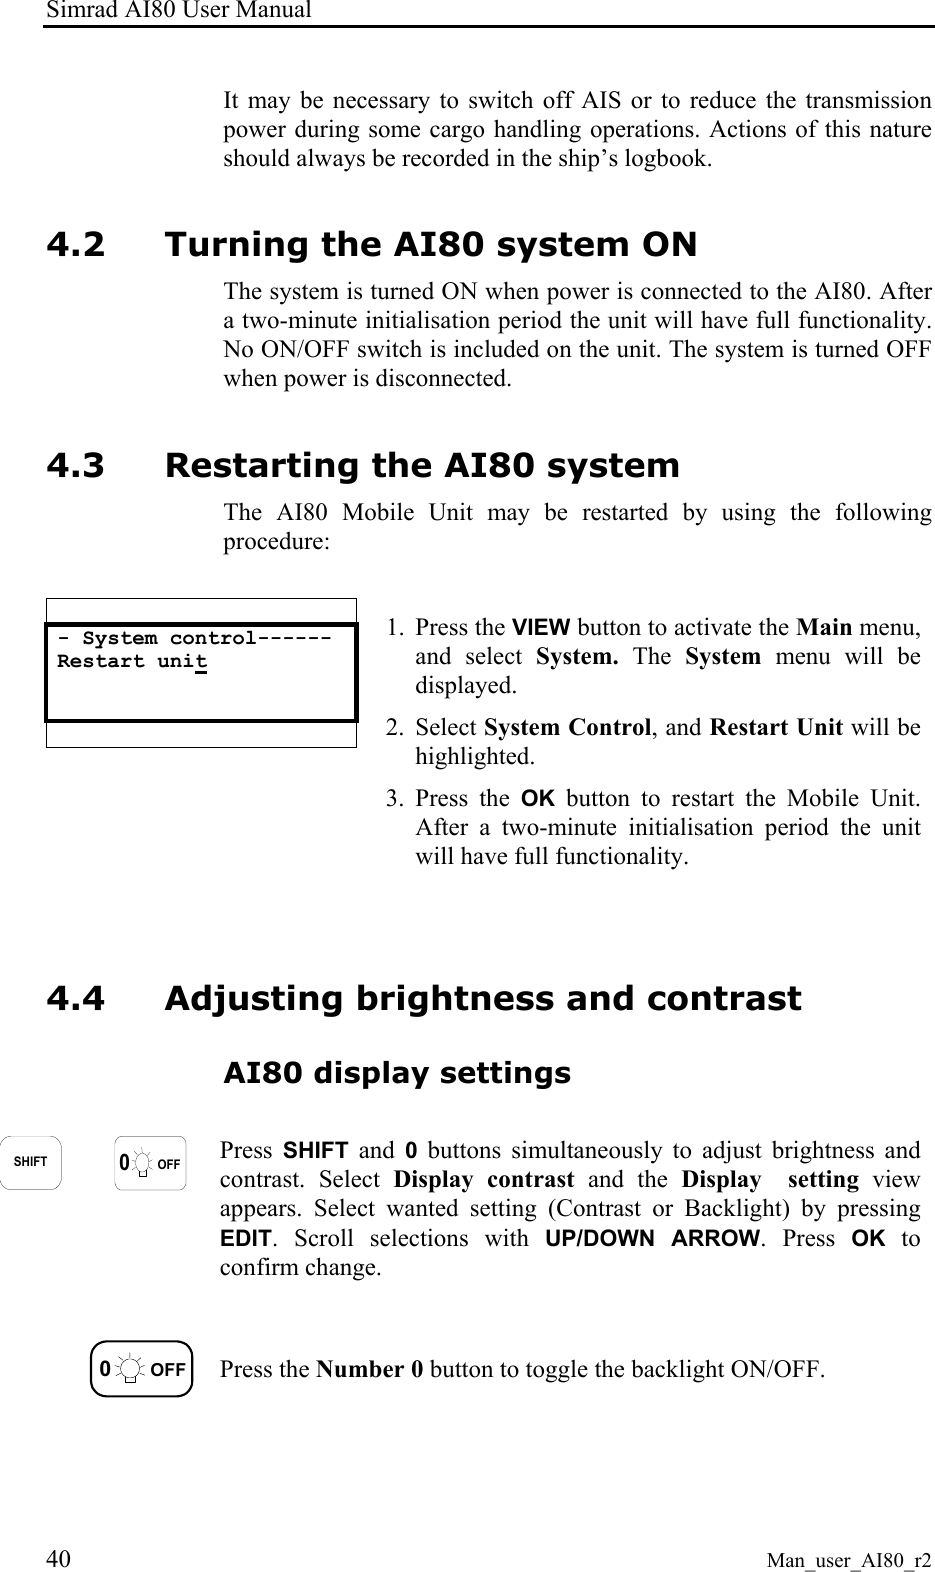 Simrad AI80 User Manual 40 Man_user_AI80_r2 It may be necessary to switch off AIS or to reduce the transmission power during some cargo handling operations. Actions of this nature should always be recorded in the ship’s logbook. 4.2 Turning the AI80 system ON The system is turned ON when power is connected to the AI80. After a two-minute initialisation period the unit will have full functionality. No ON/OFF switch is included on the unit. The system is turned OFF when power is disconnected. 4.3 Restarting the AI80 system The AI80 Mobile Unit may be restarted by using the following procedure:   - System control------ Restart unit      1. Press the VIEW button to activate the Main menu, and select System.  The  System menu will be displayed. 2. Select System Control, and Restart Unit will be highlighted. 3. Press the OK button to restart the Mobile Unit. After a two-minute initialisation period the unit will have full functionality. 4.4 Adjusting brightness and contrast AI80 display settings  SHIFT0OFF Press  SHIFT and 0 buttons simultaneously to adjust brightness and contrast. Select Display contrast and the Display  setting view appears. Select wanted setting (Contrast or Backlight) by pressing EDIT. Scroll selections with UP/DOWN ARROW. Press OK to confirm change.  0OFF Press the Number 0 button to toggle the backlight ON/OFF. 